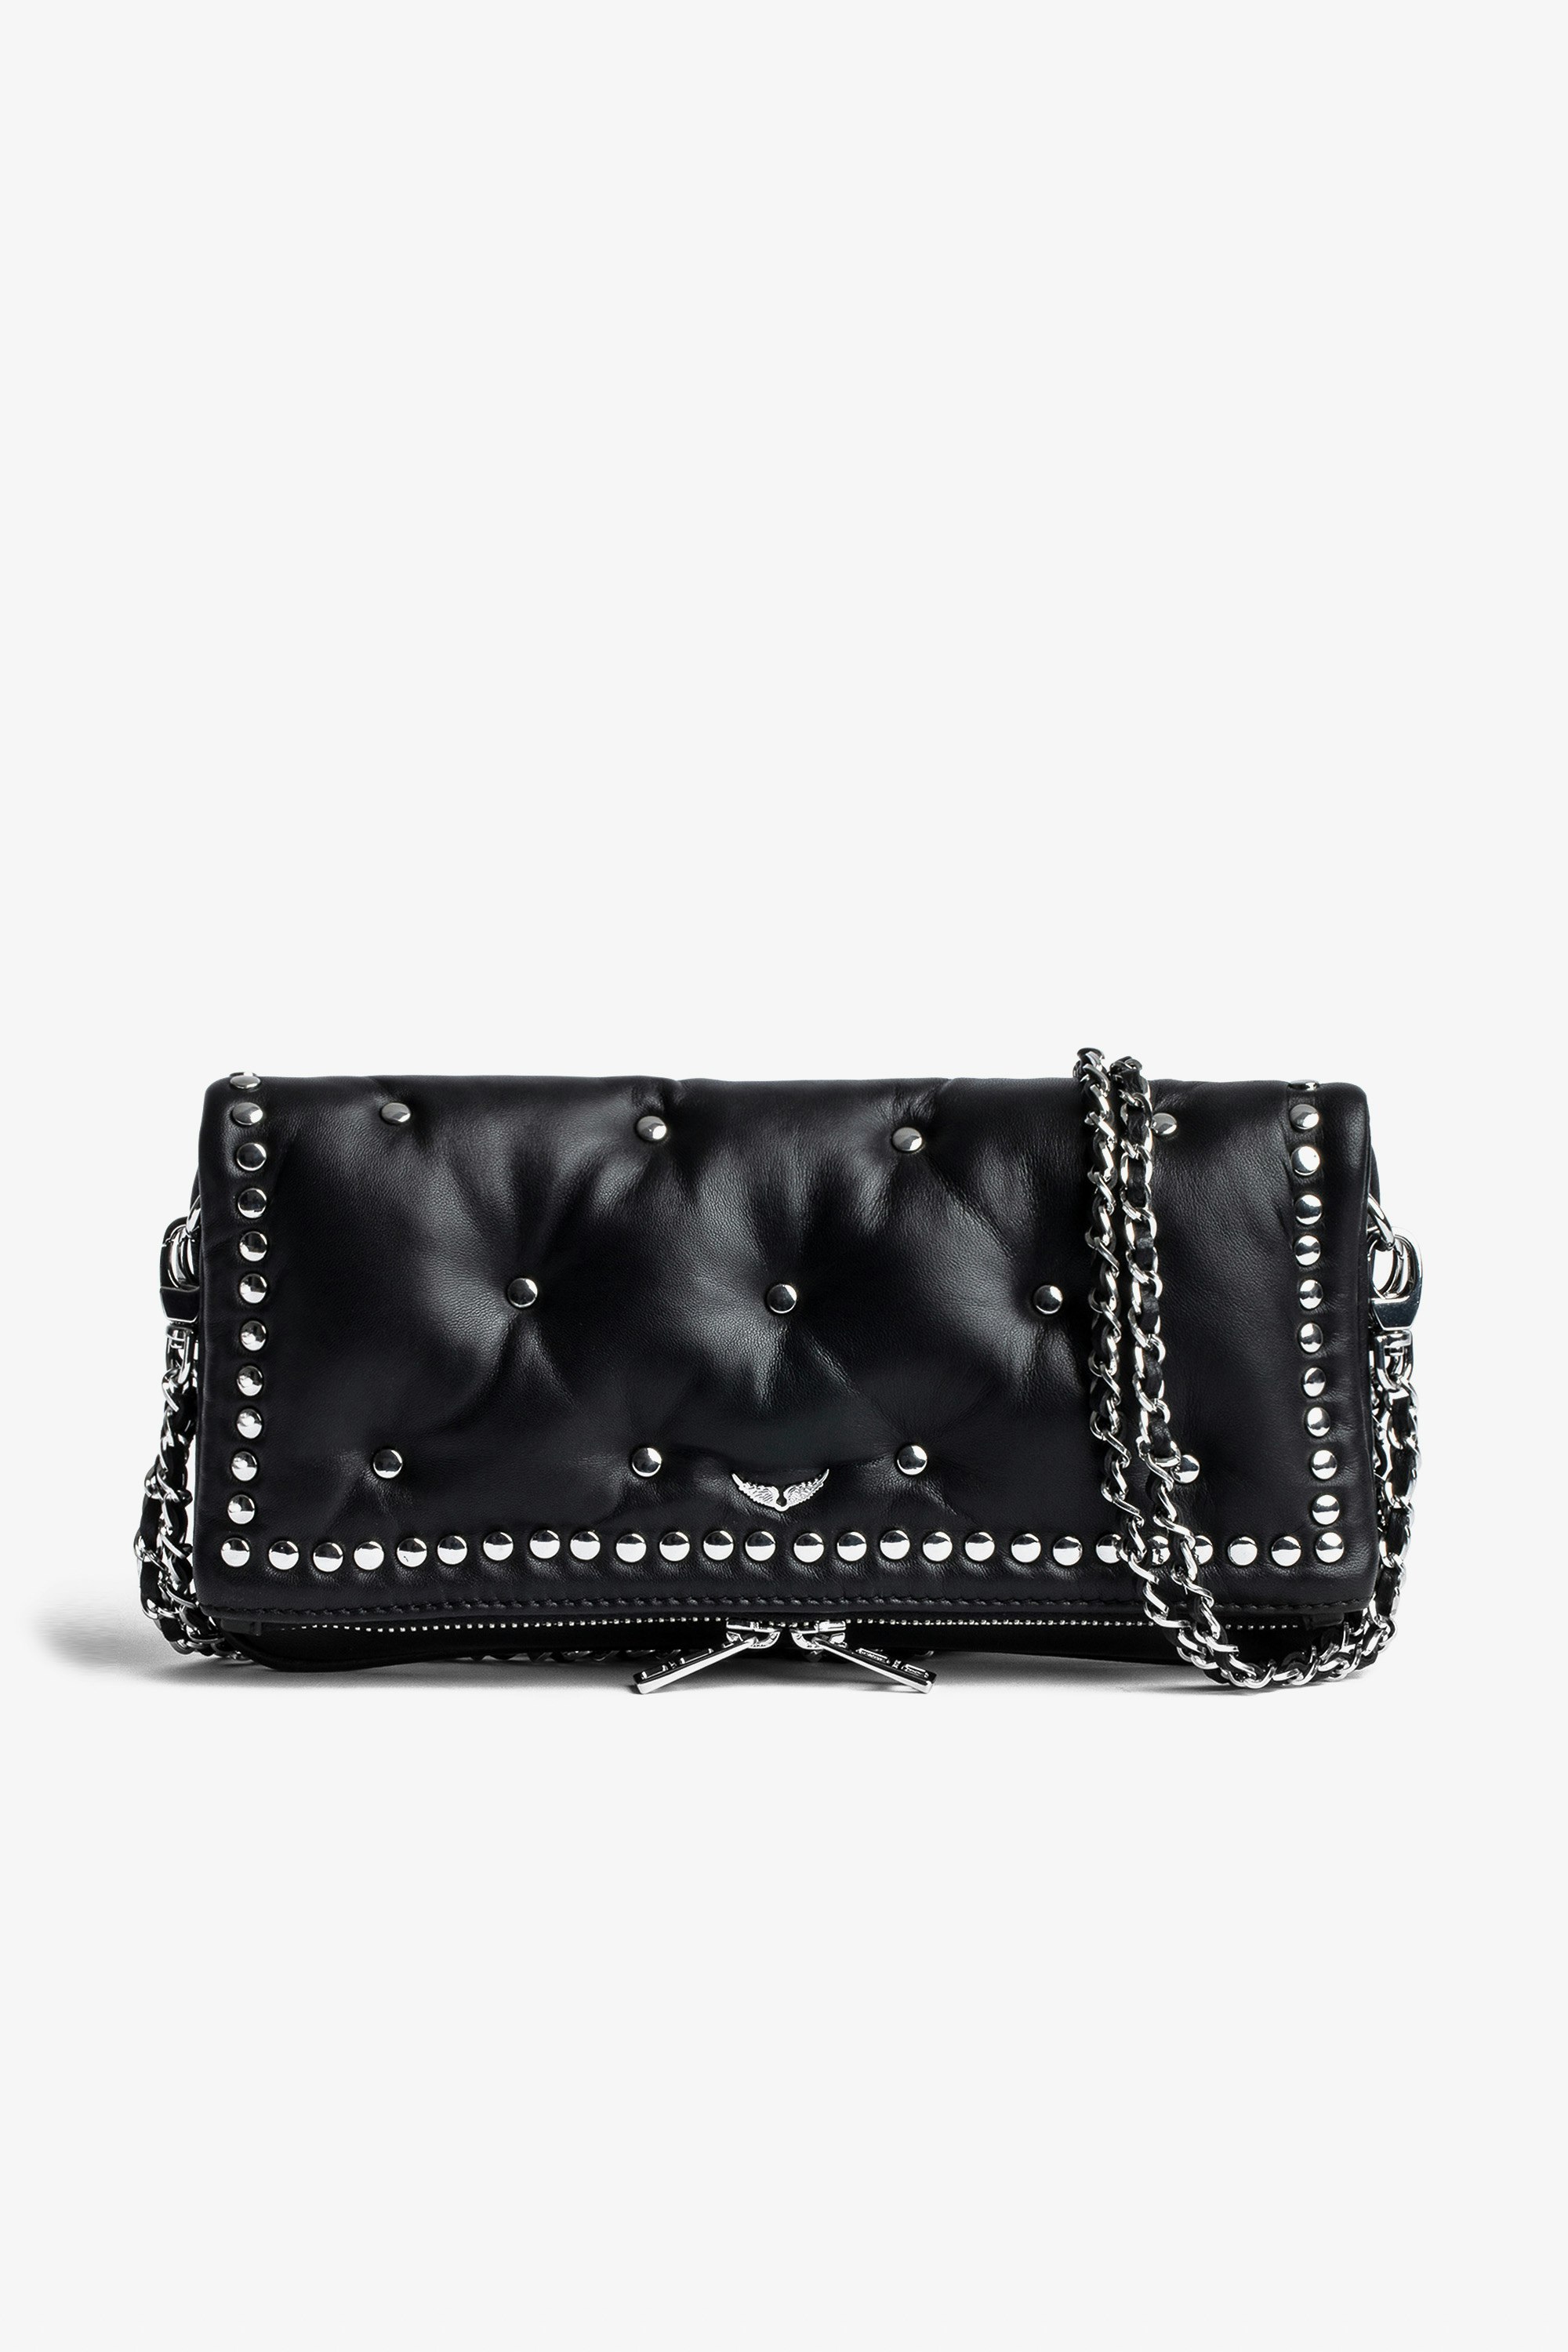 Rock Rider Clutch Women’s black leather clutch with studs, a leather shoulder strap and chain